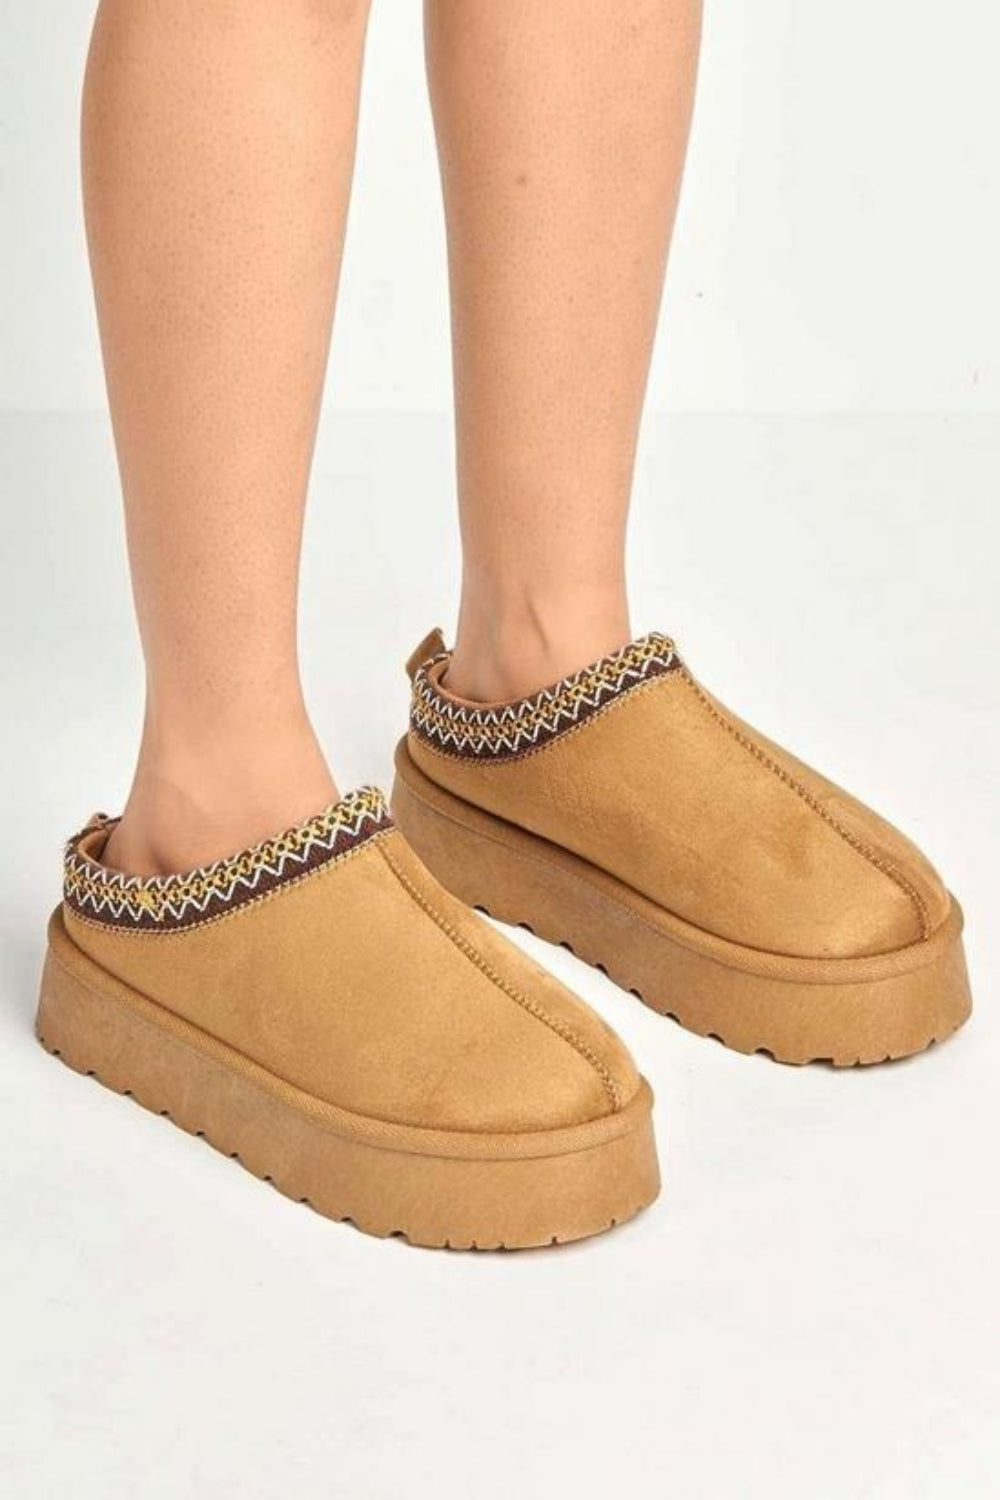 CHESTNUT FLUFFY PLATFORM SLIPPERS FAUX FUR LINED ANKLE BOOTS